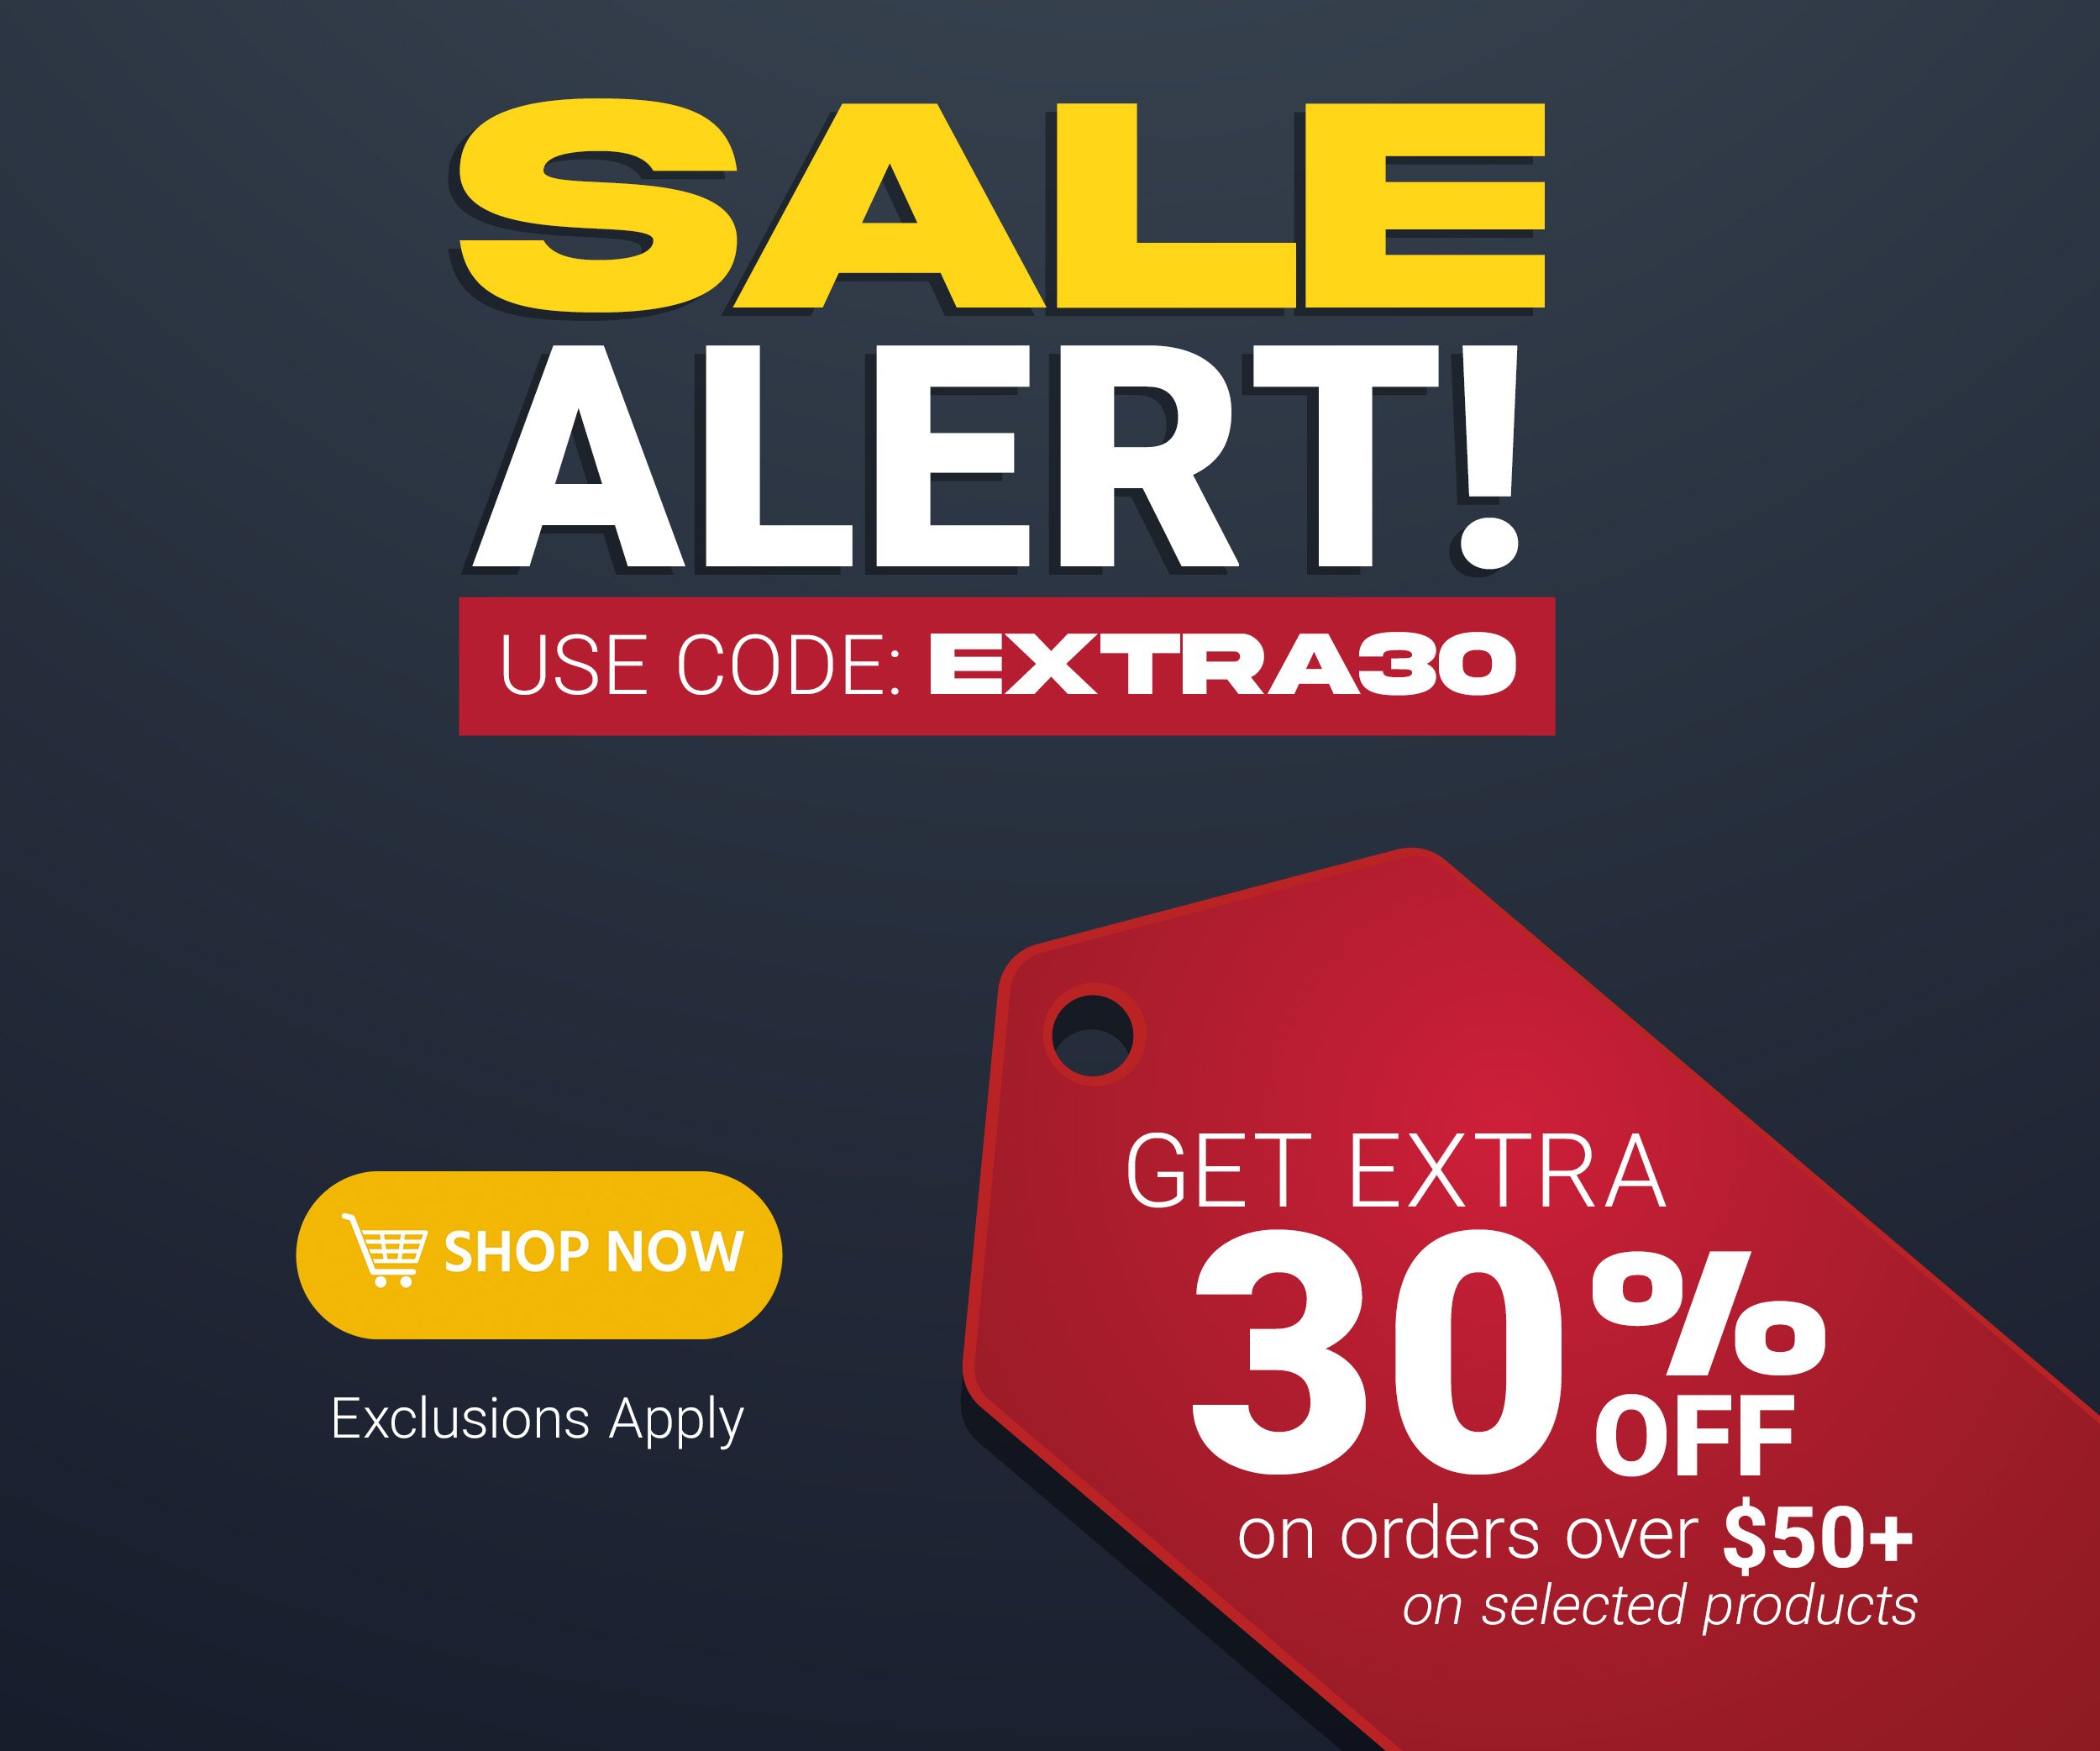 Sale Alert! Get extra 30% off orders $50+ on selected products. Use code: EXTRA30 Limited Time Offer Shop Now